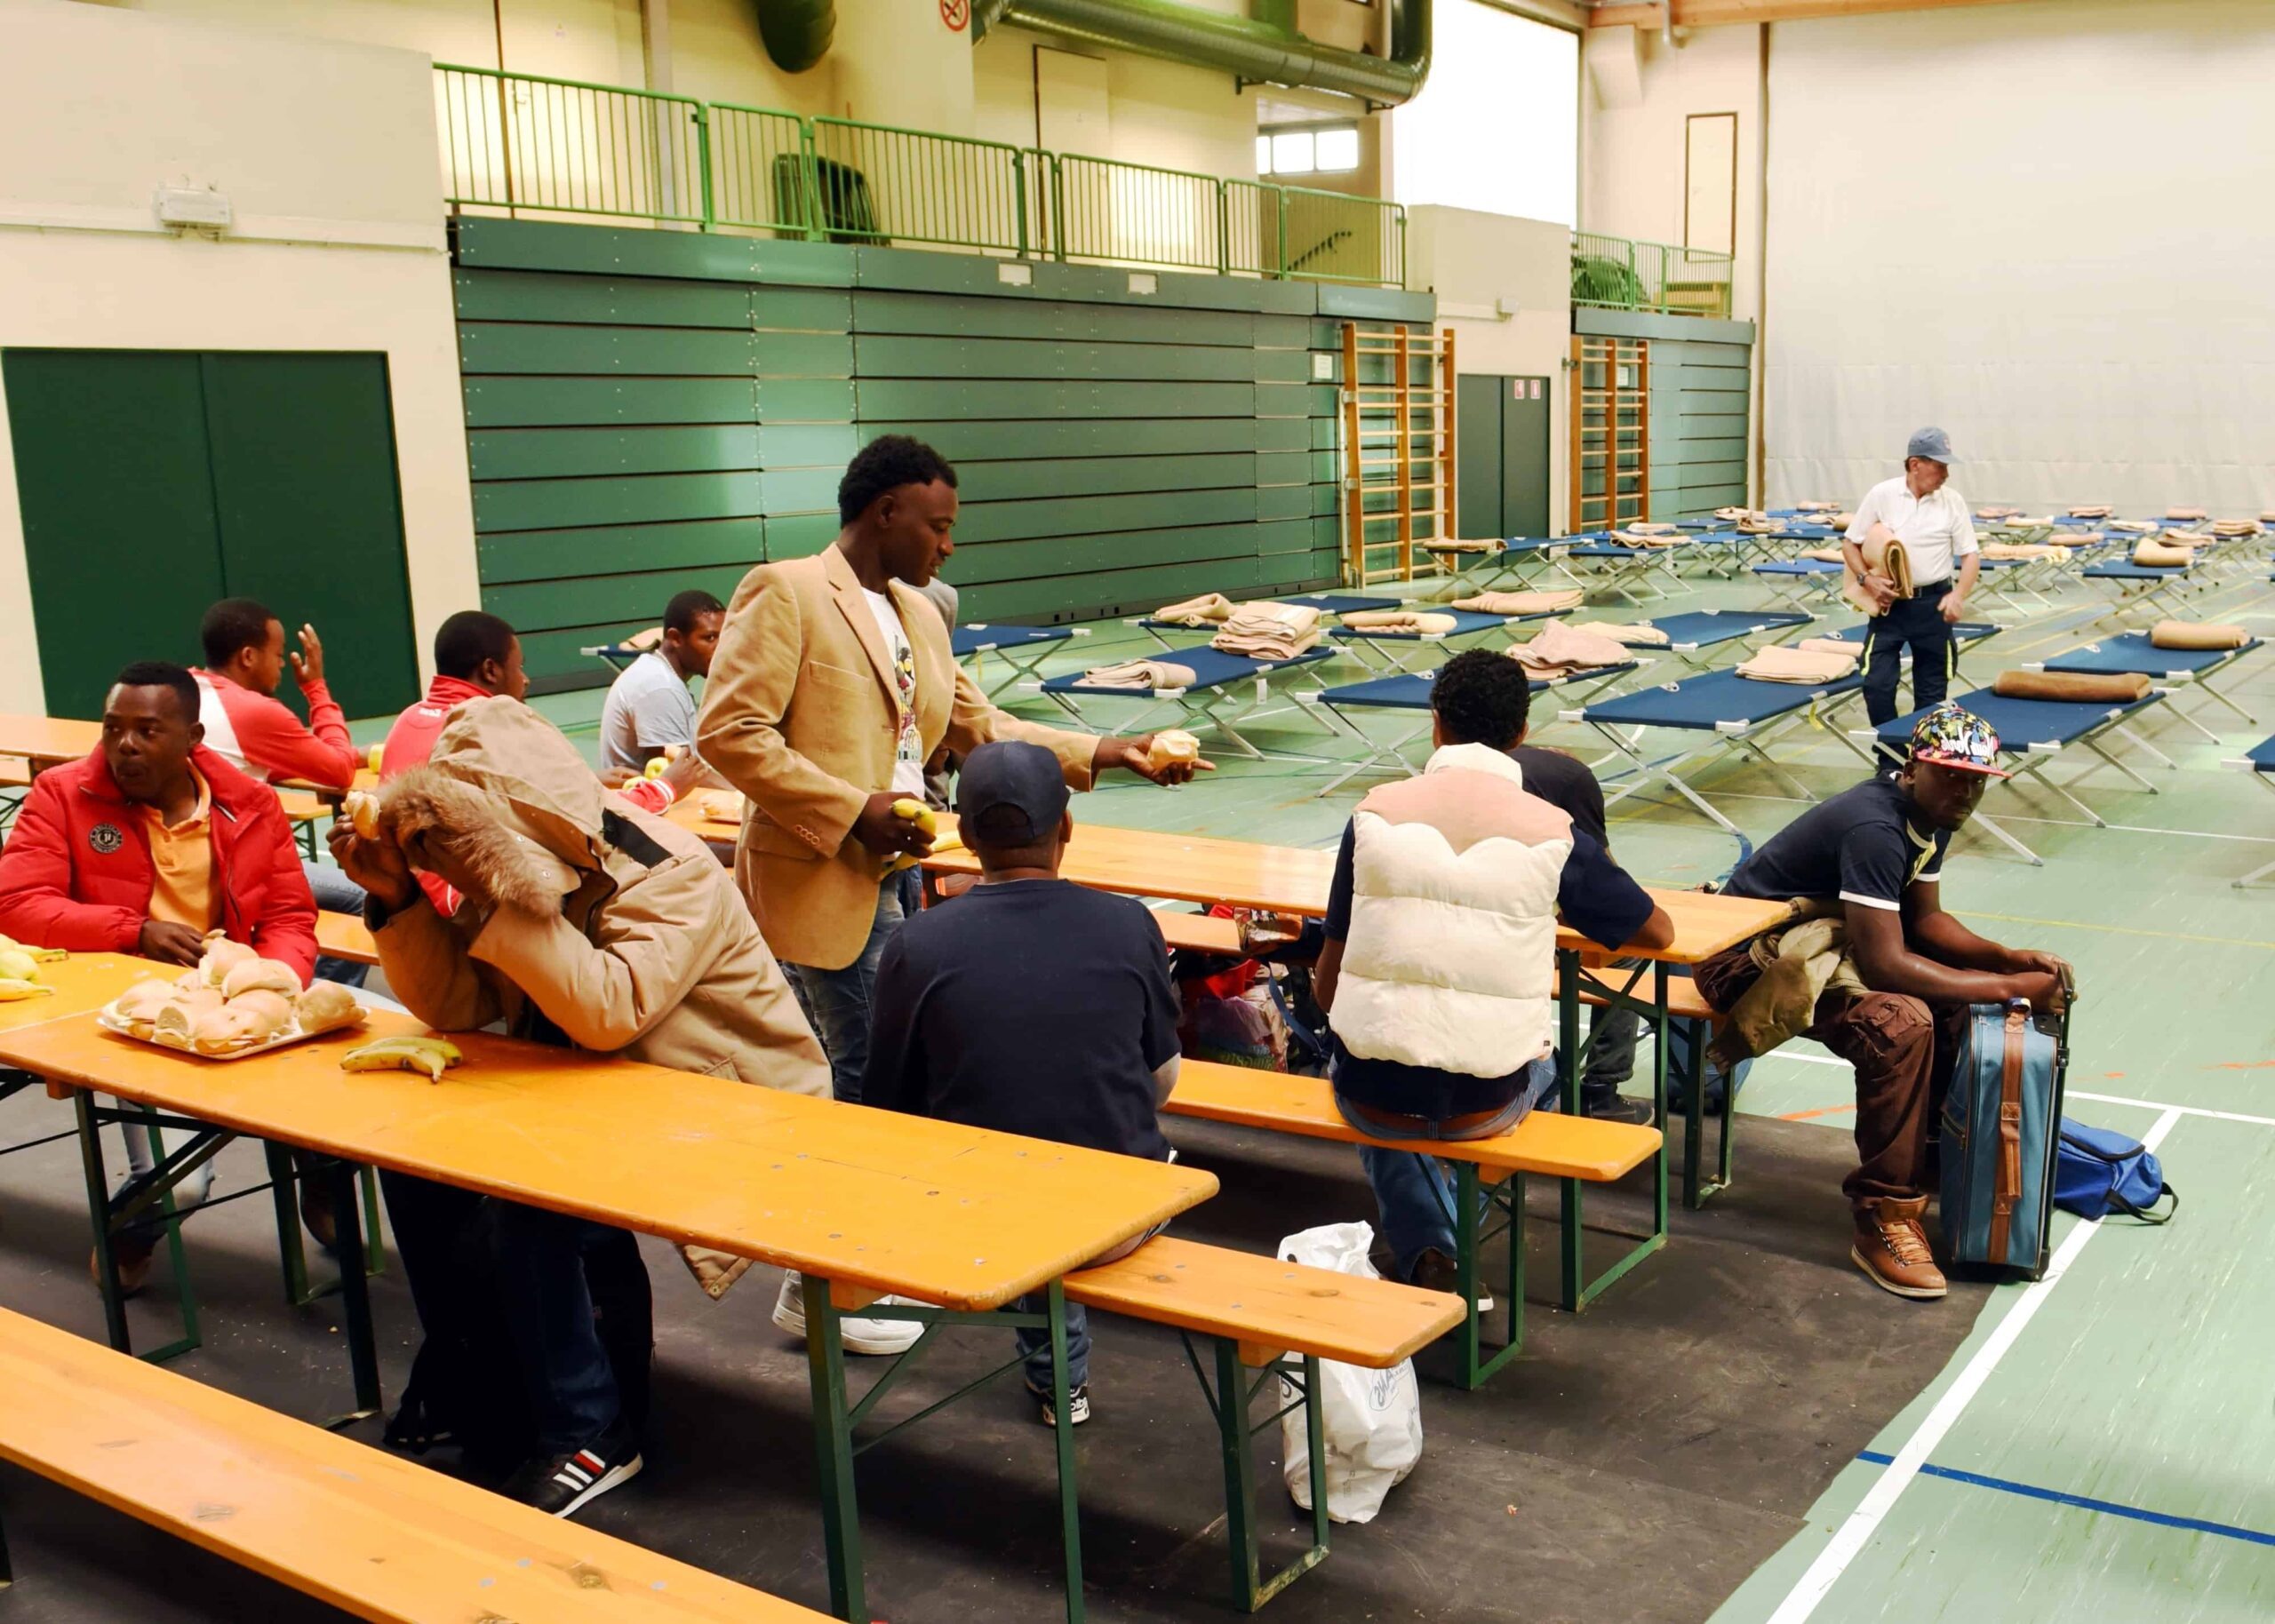 A group of men sit at tables inside a gym.